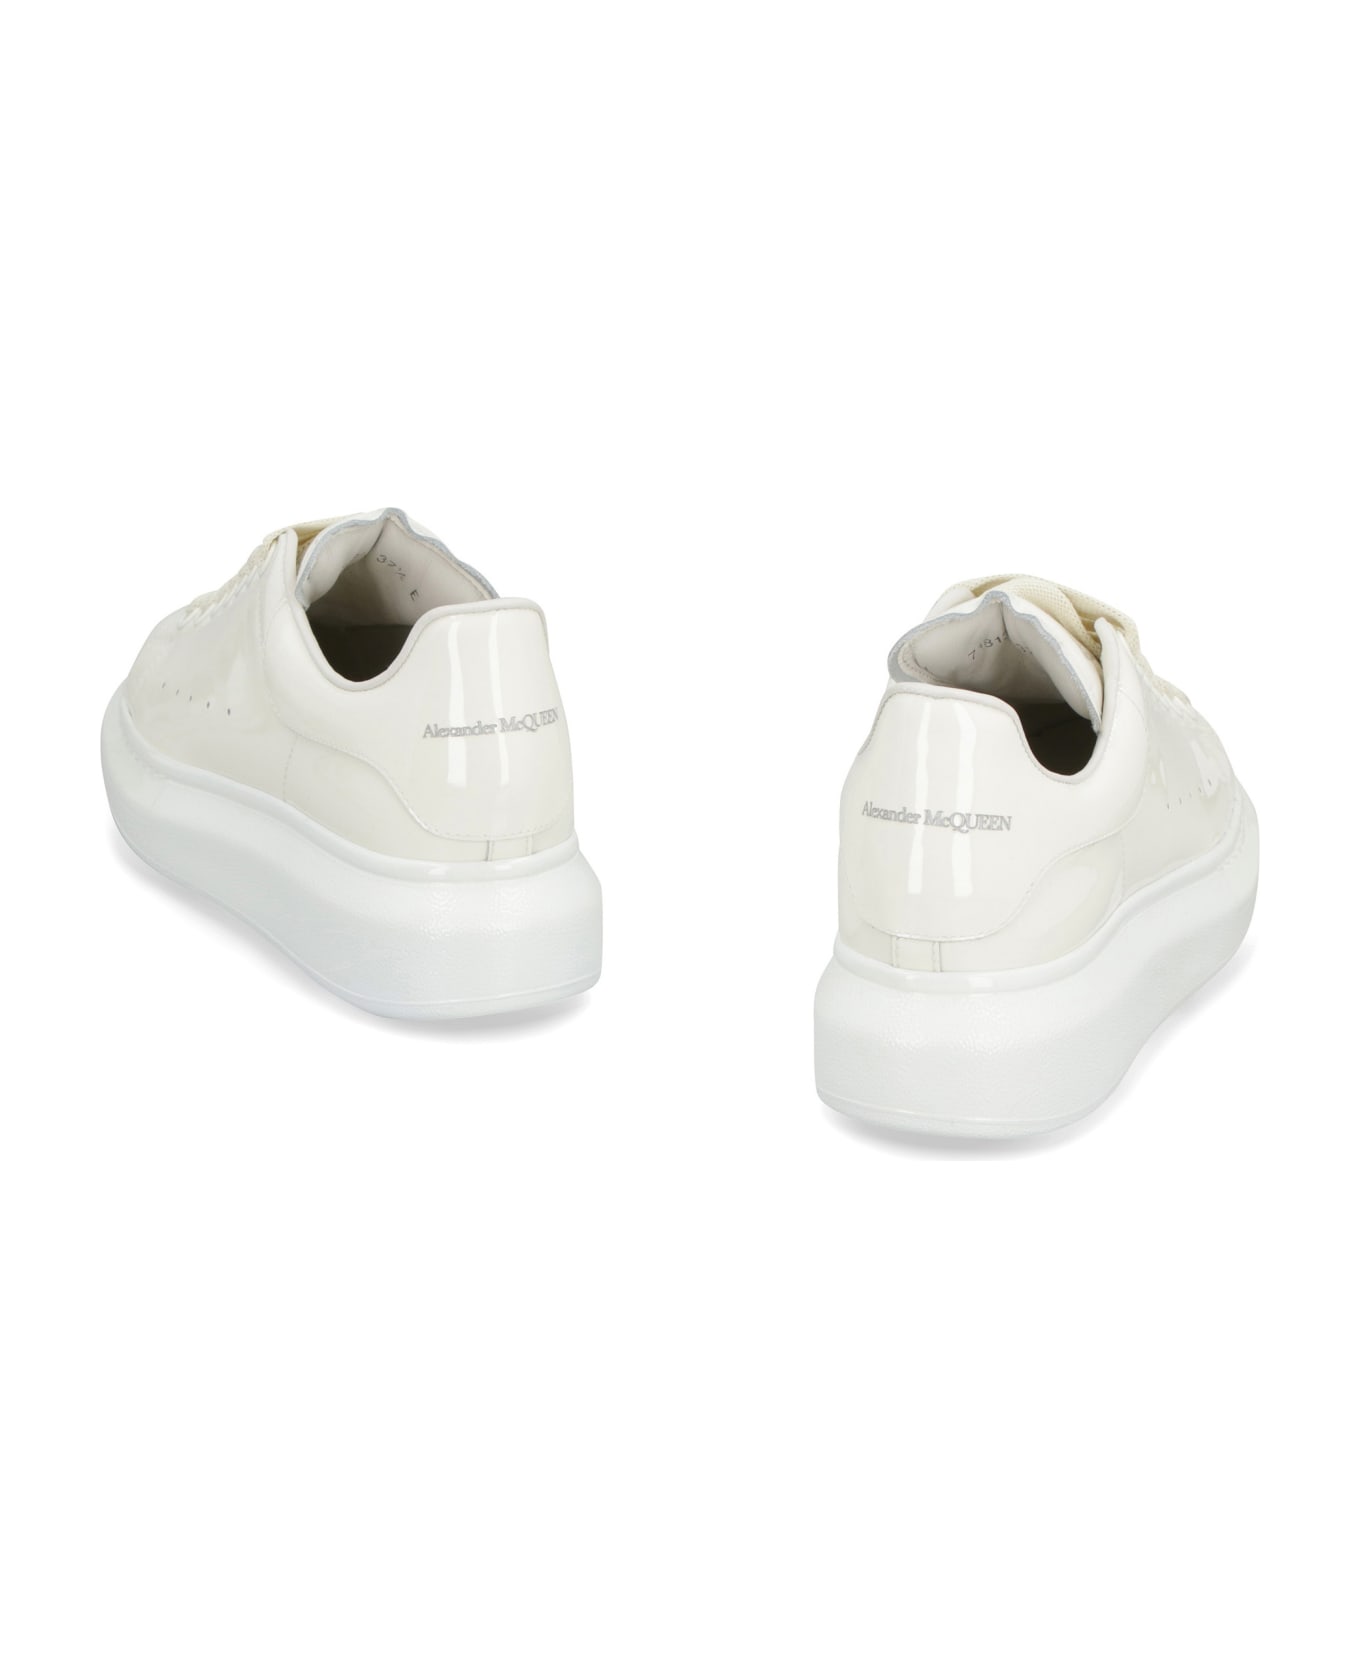 Alexander McQueen Larry Patent Leather Sneakers - White